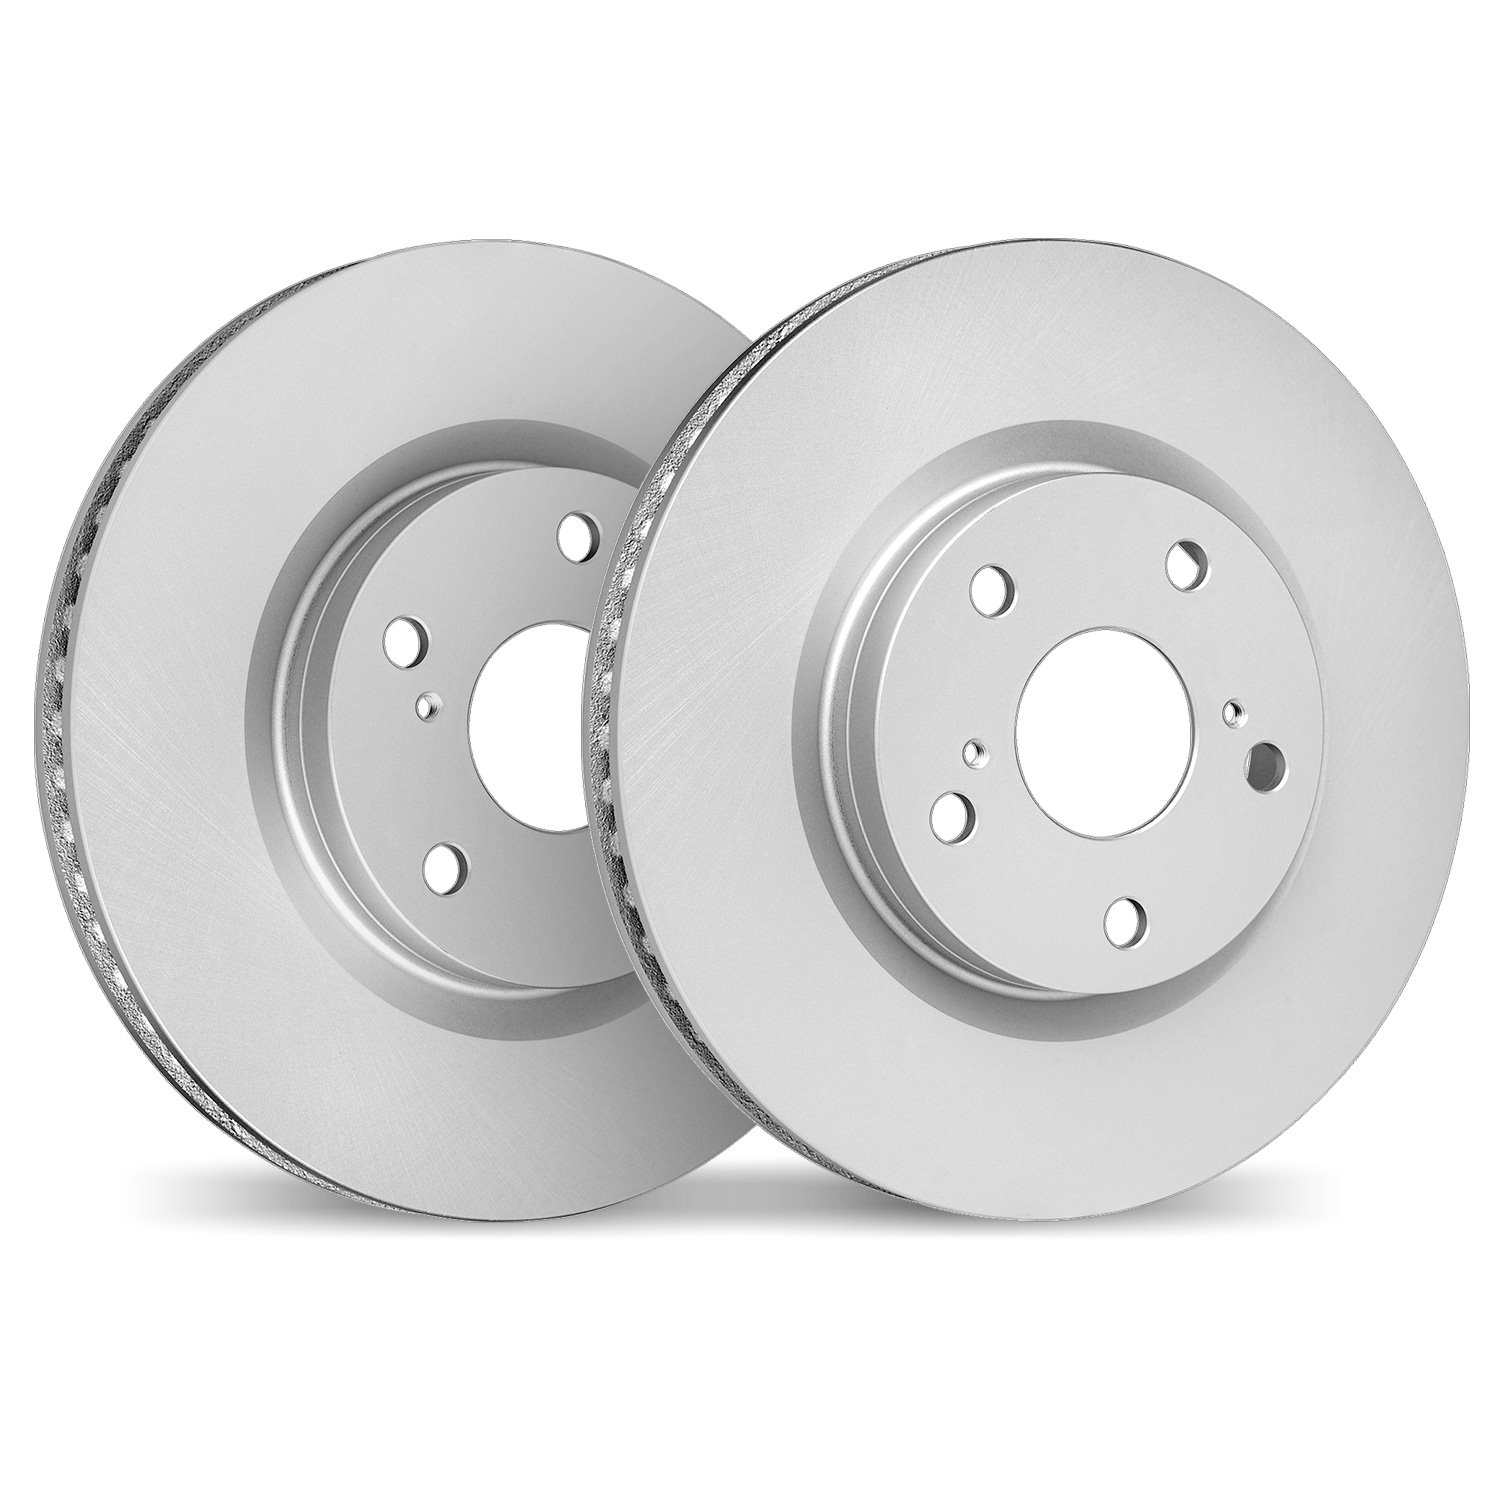 4002-54173 Geospec Brake Rotors, Fits Select Ford/Lincoln/Mercury/Mazda, Position: Front